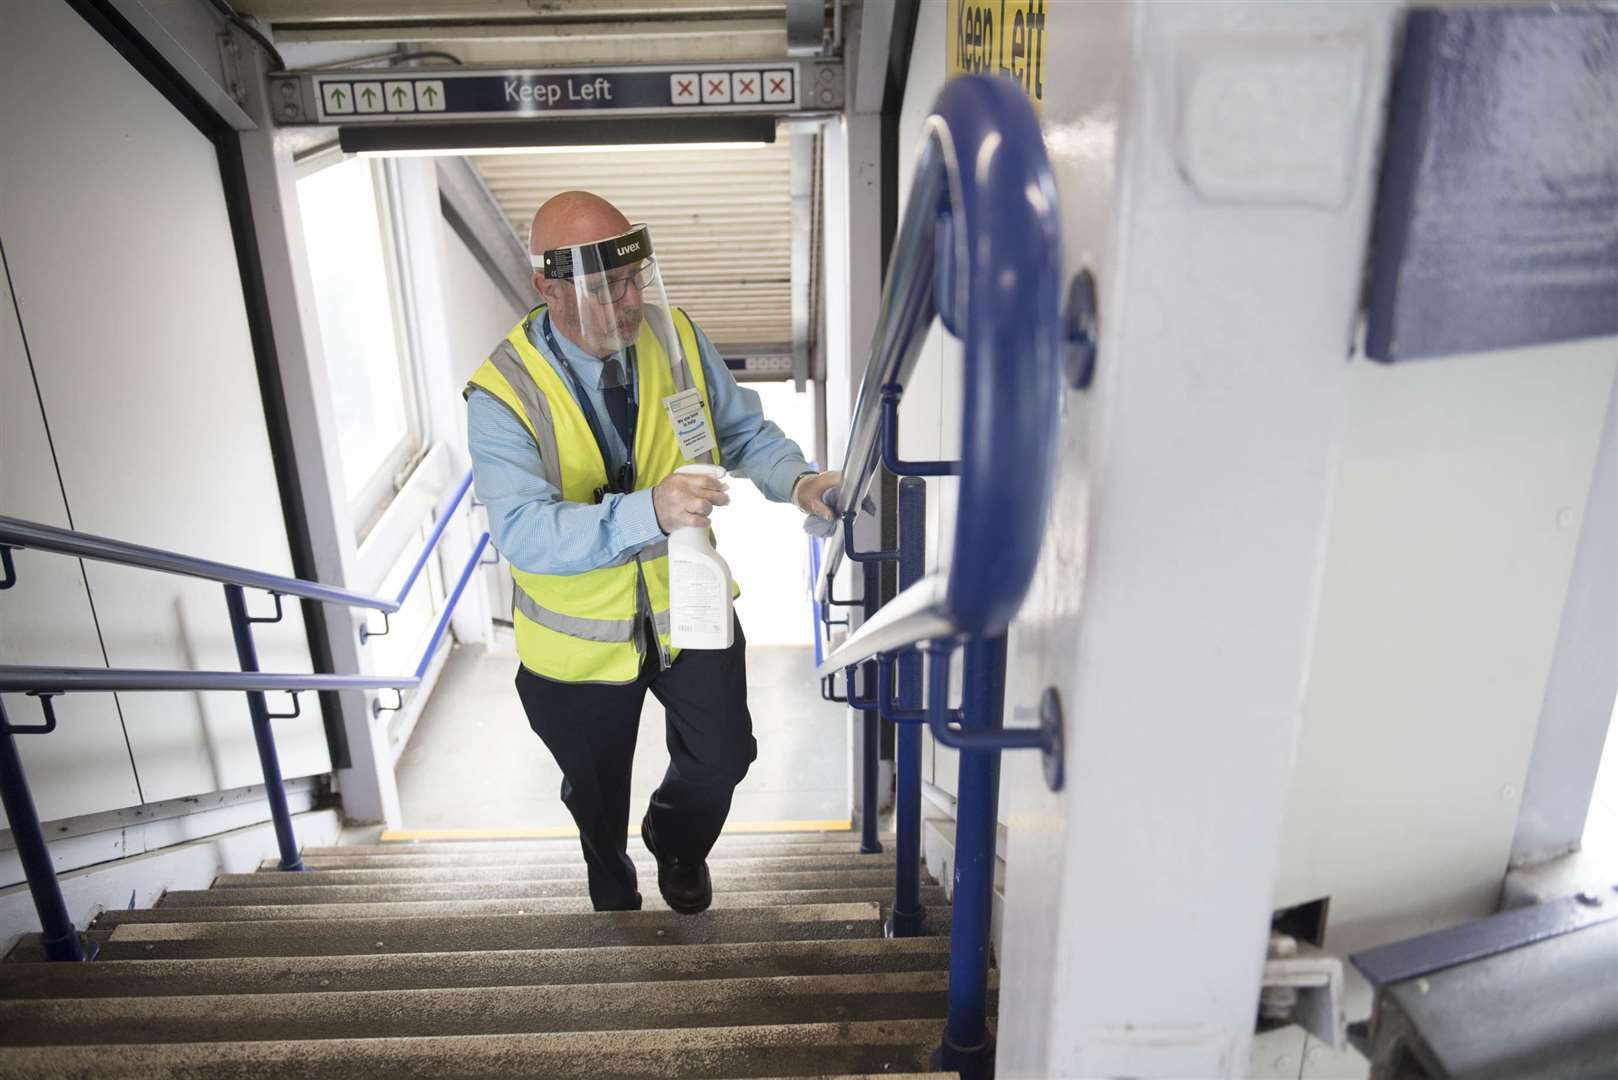 Additional staff are being employed to keep stations clean. Picture: Southeastern